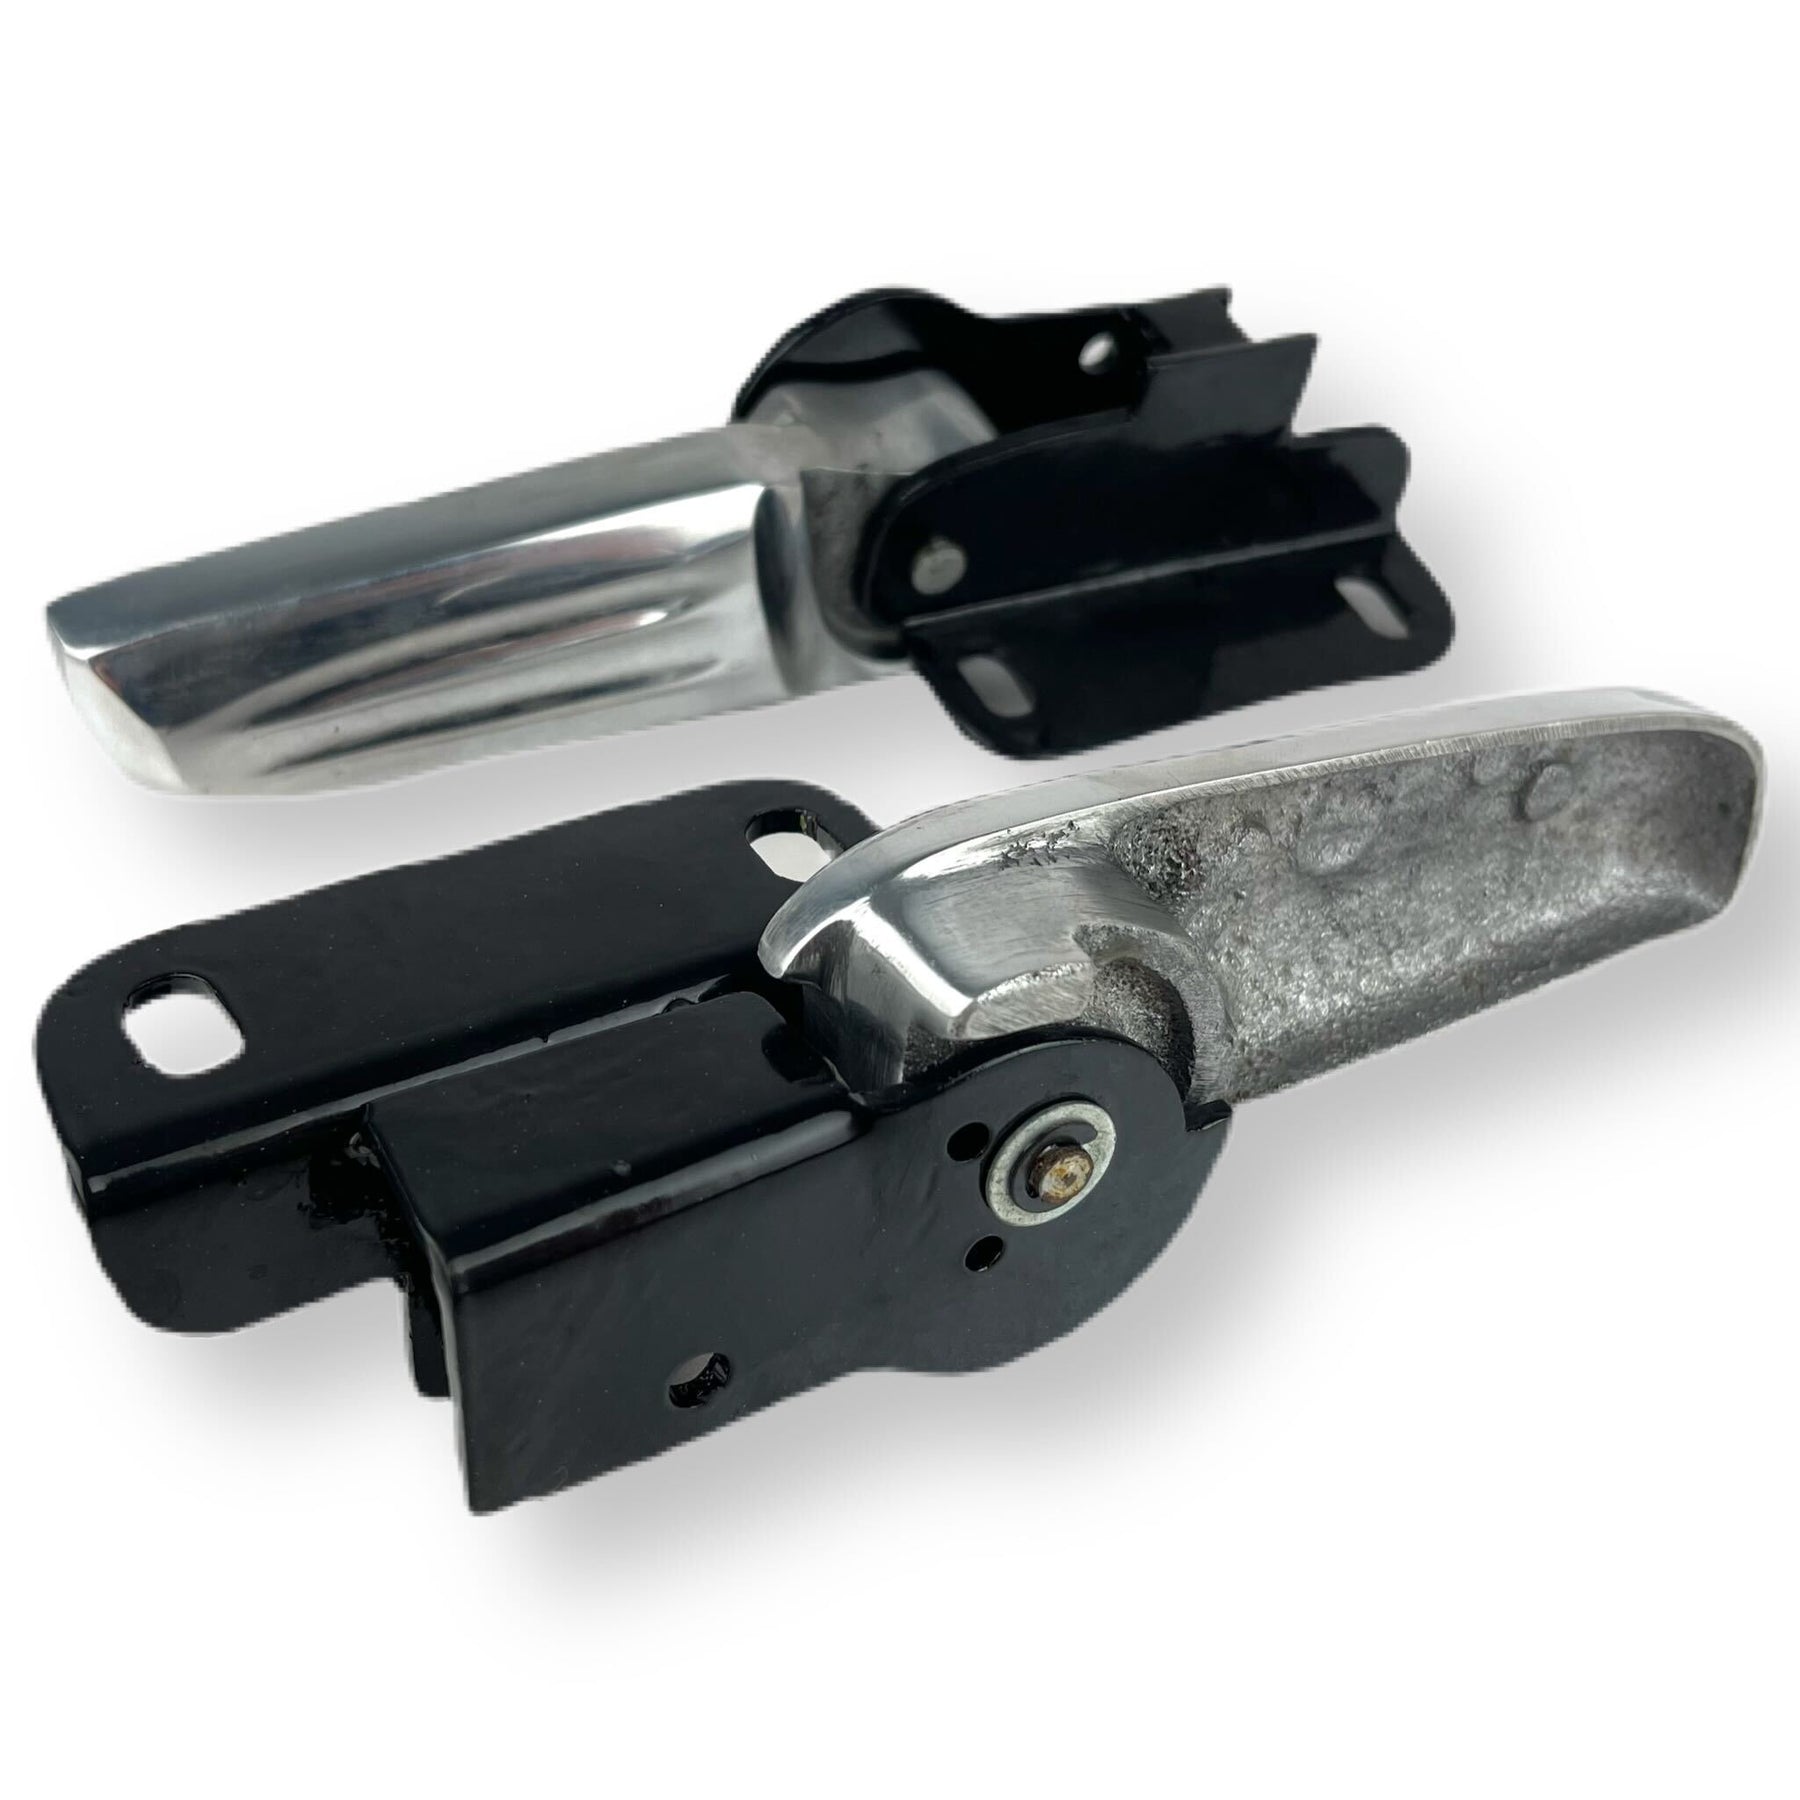 Scomadi Royal Alloy Polished Alloy Footpegs Footrests with Mounting Brackets